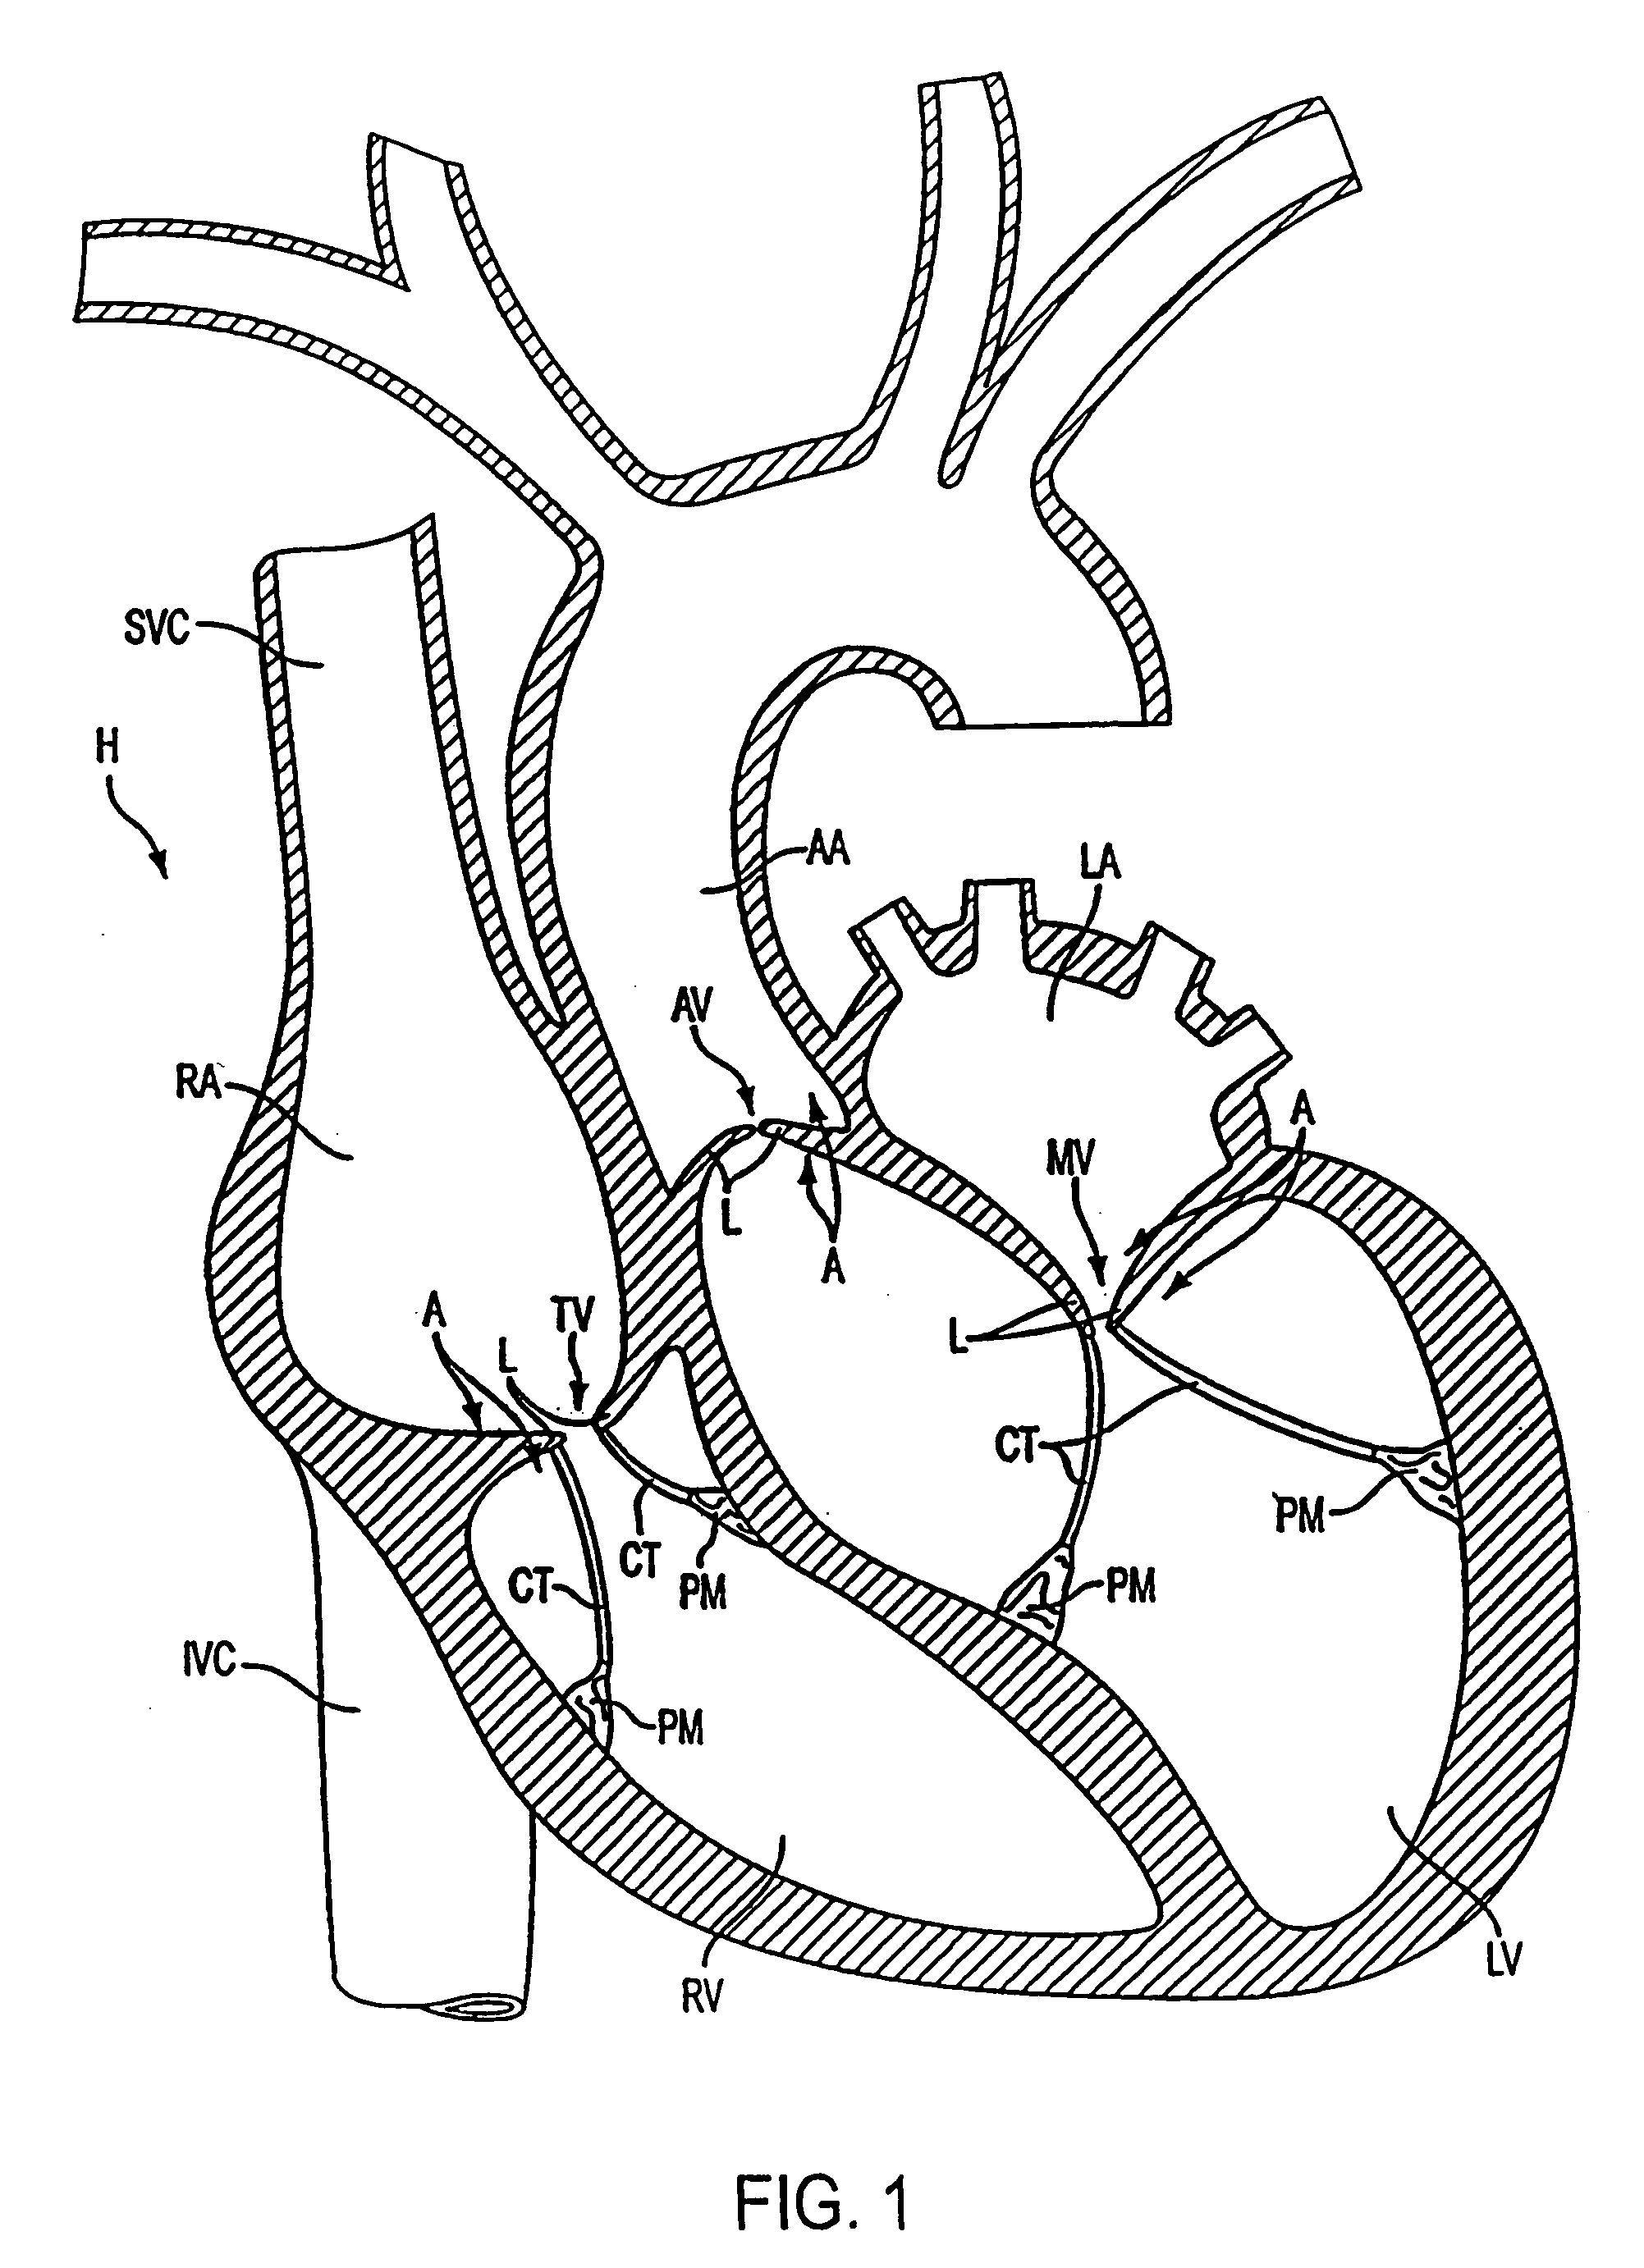 Apparatus and methods for treating tissue